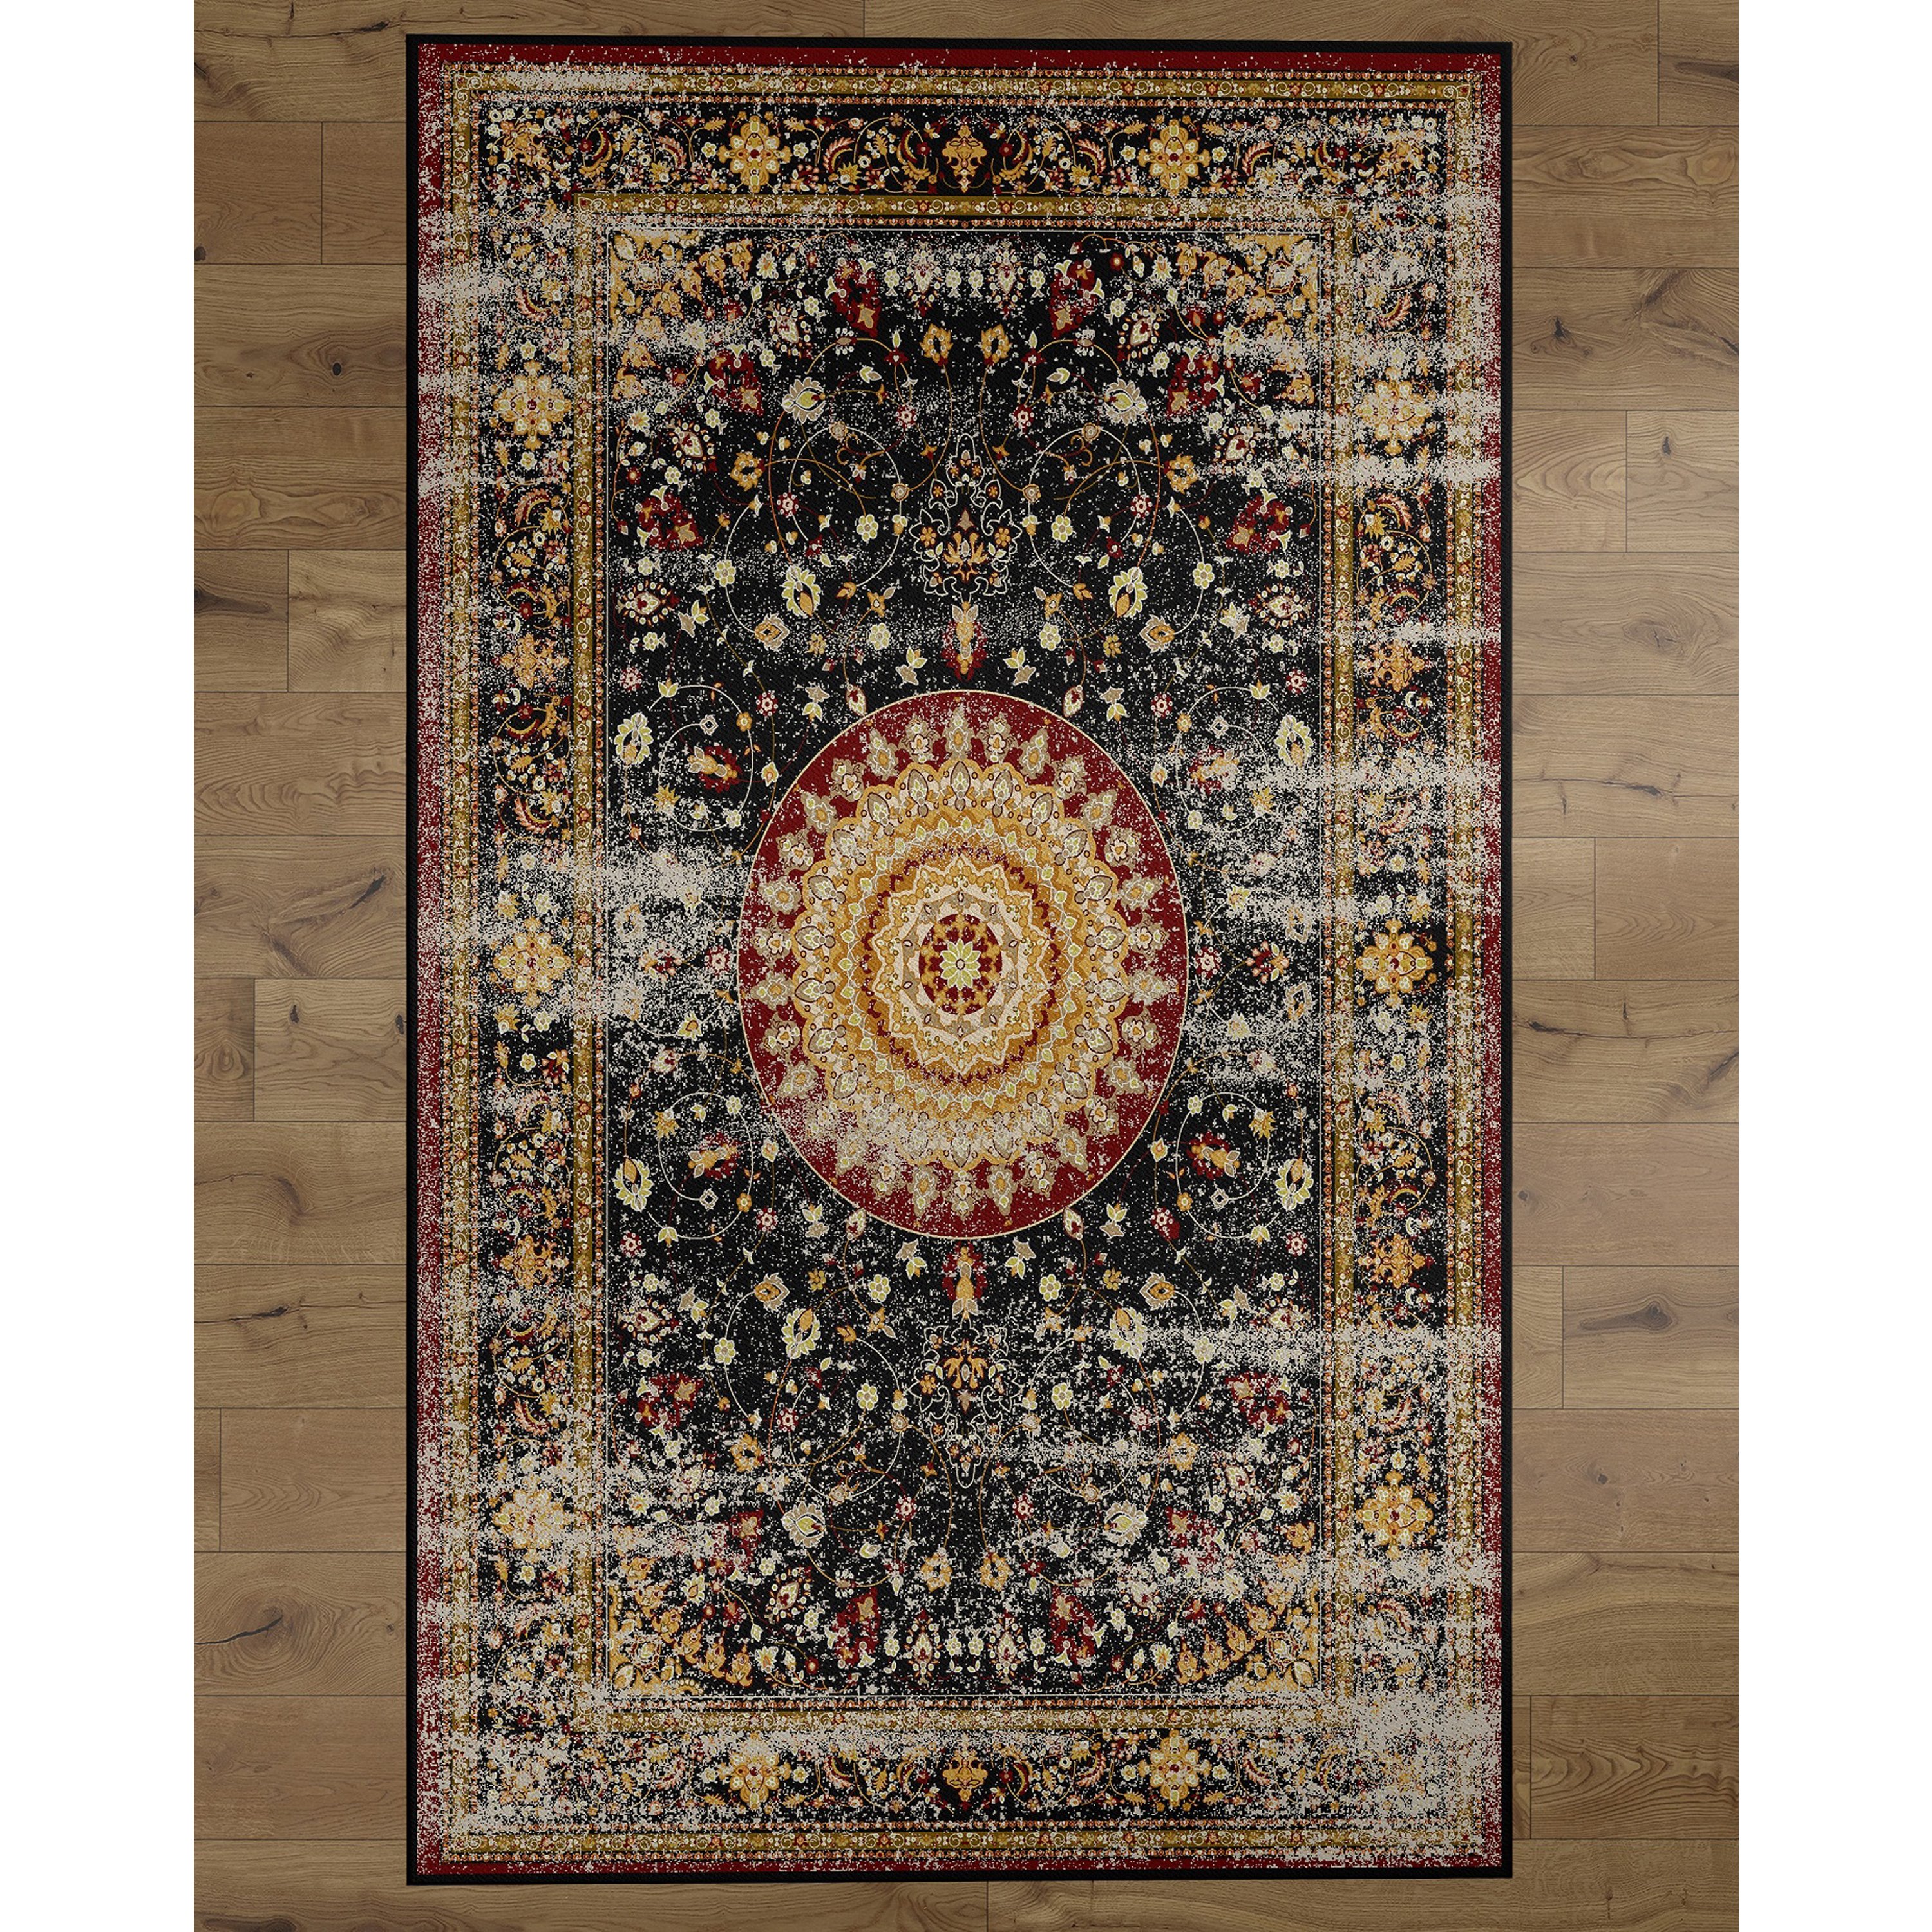 Deerlux Traditional Oriental Persian Style Living Room Area Rug With Nonslip Backing, Classic Red - 8x10